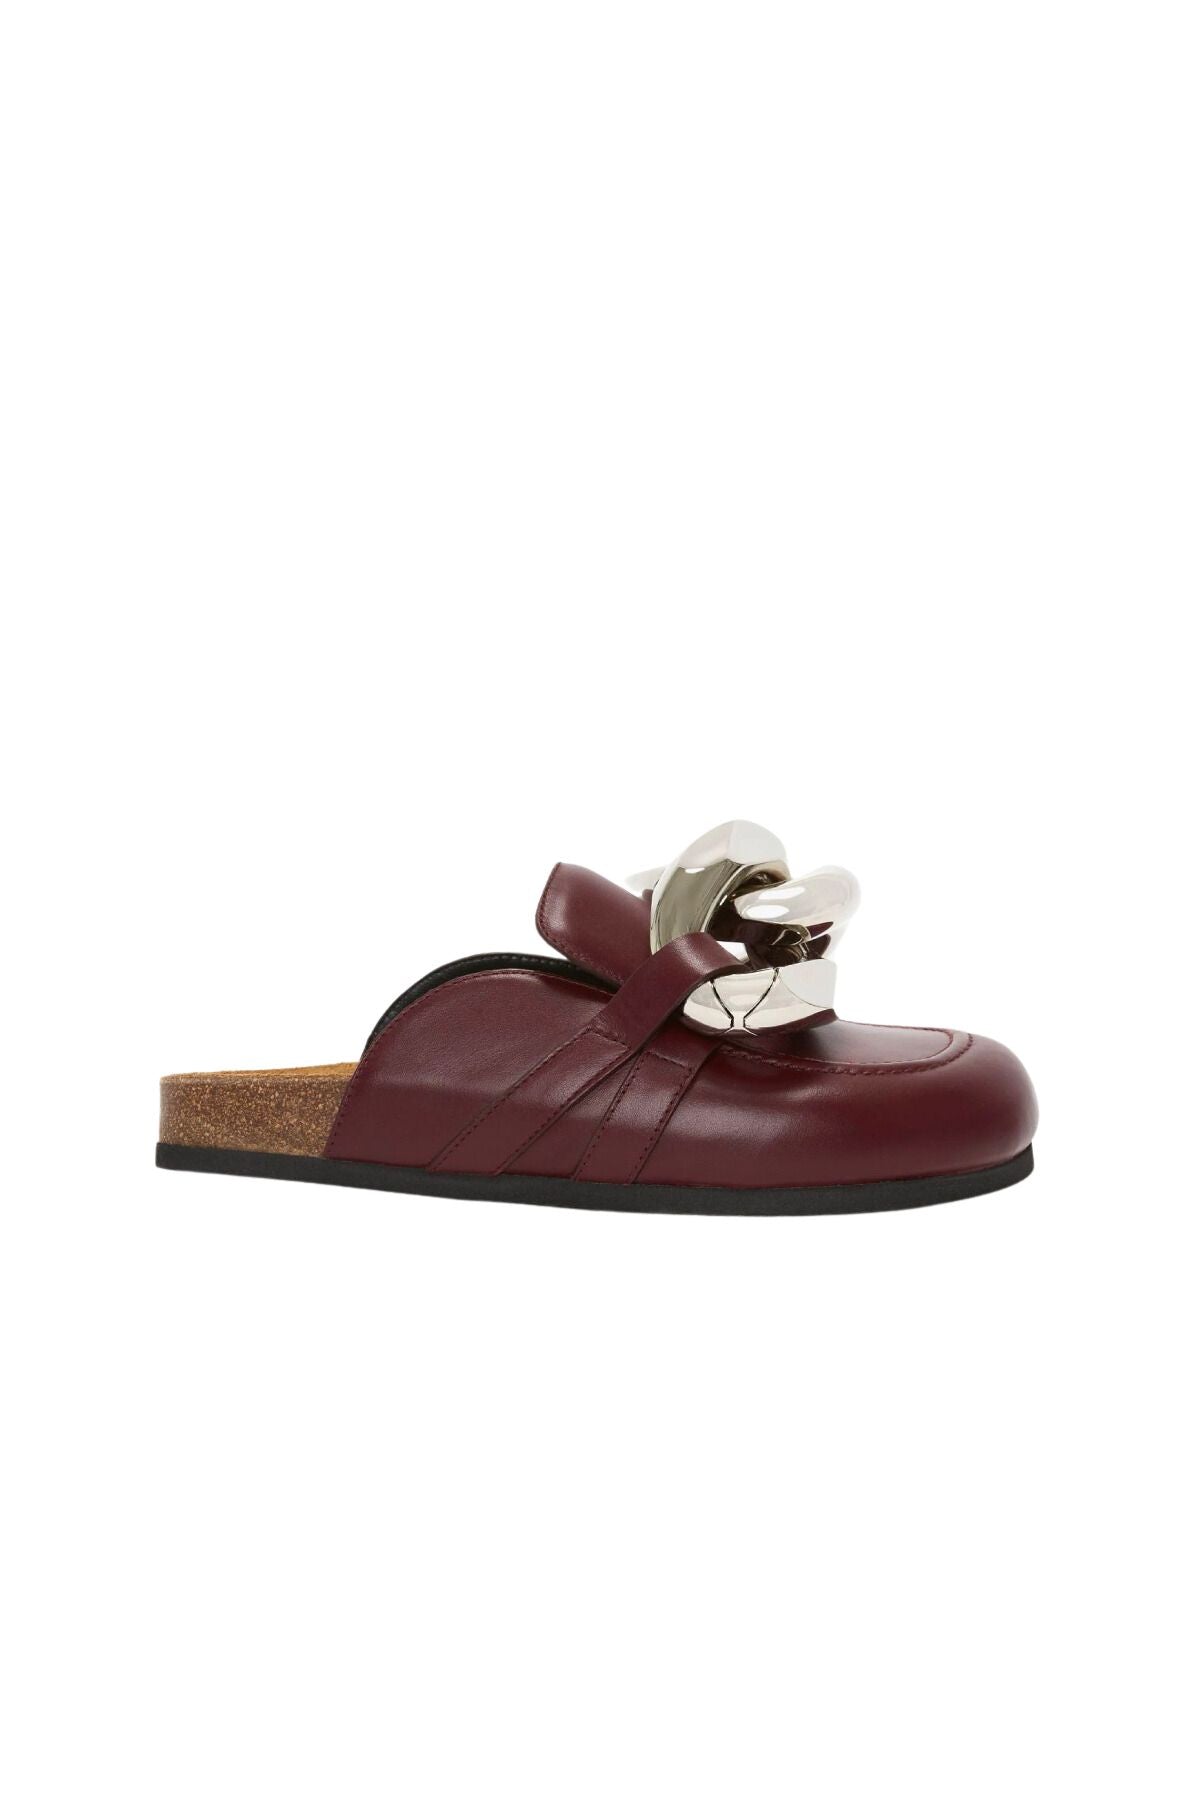 JW Anderson Chain Loafer - Burgundy/ Silver